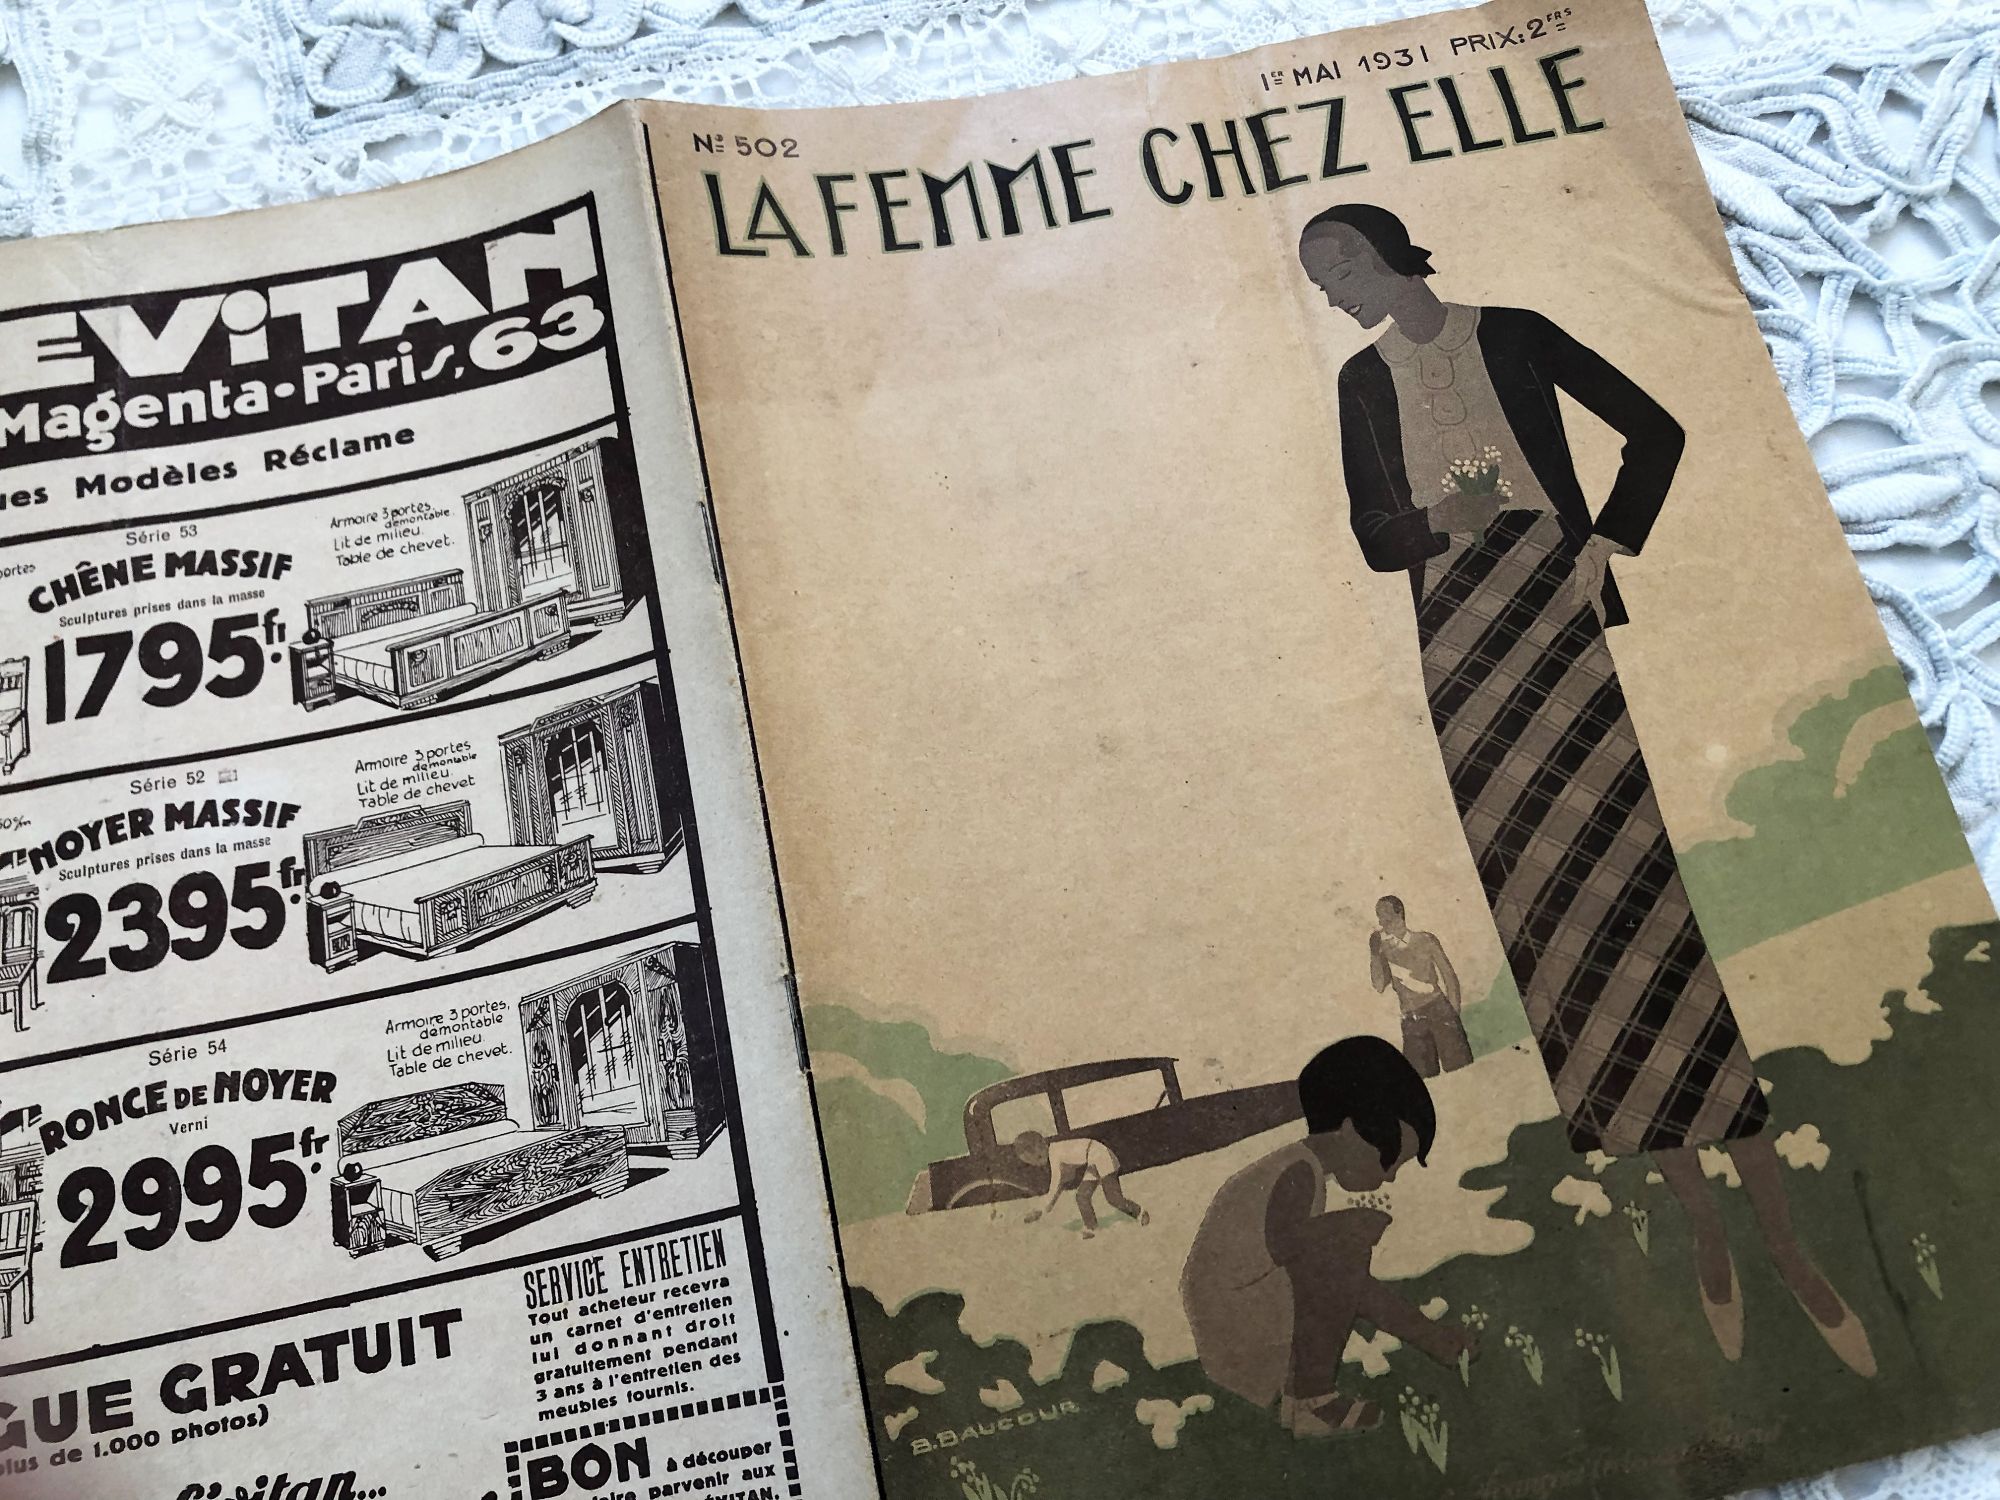 French fashion magazine "La femme chez elle" with illustrations, articles and advertising of May 1931